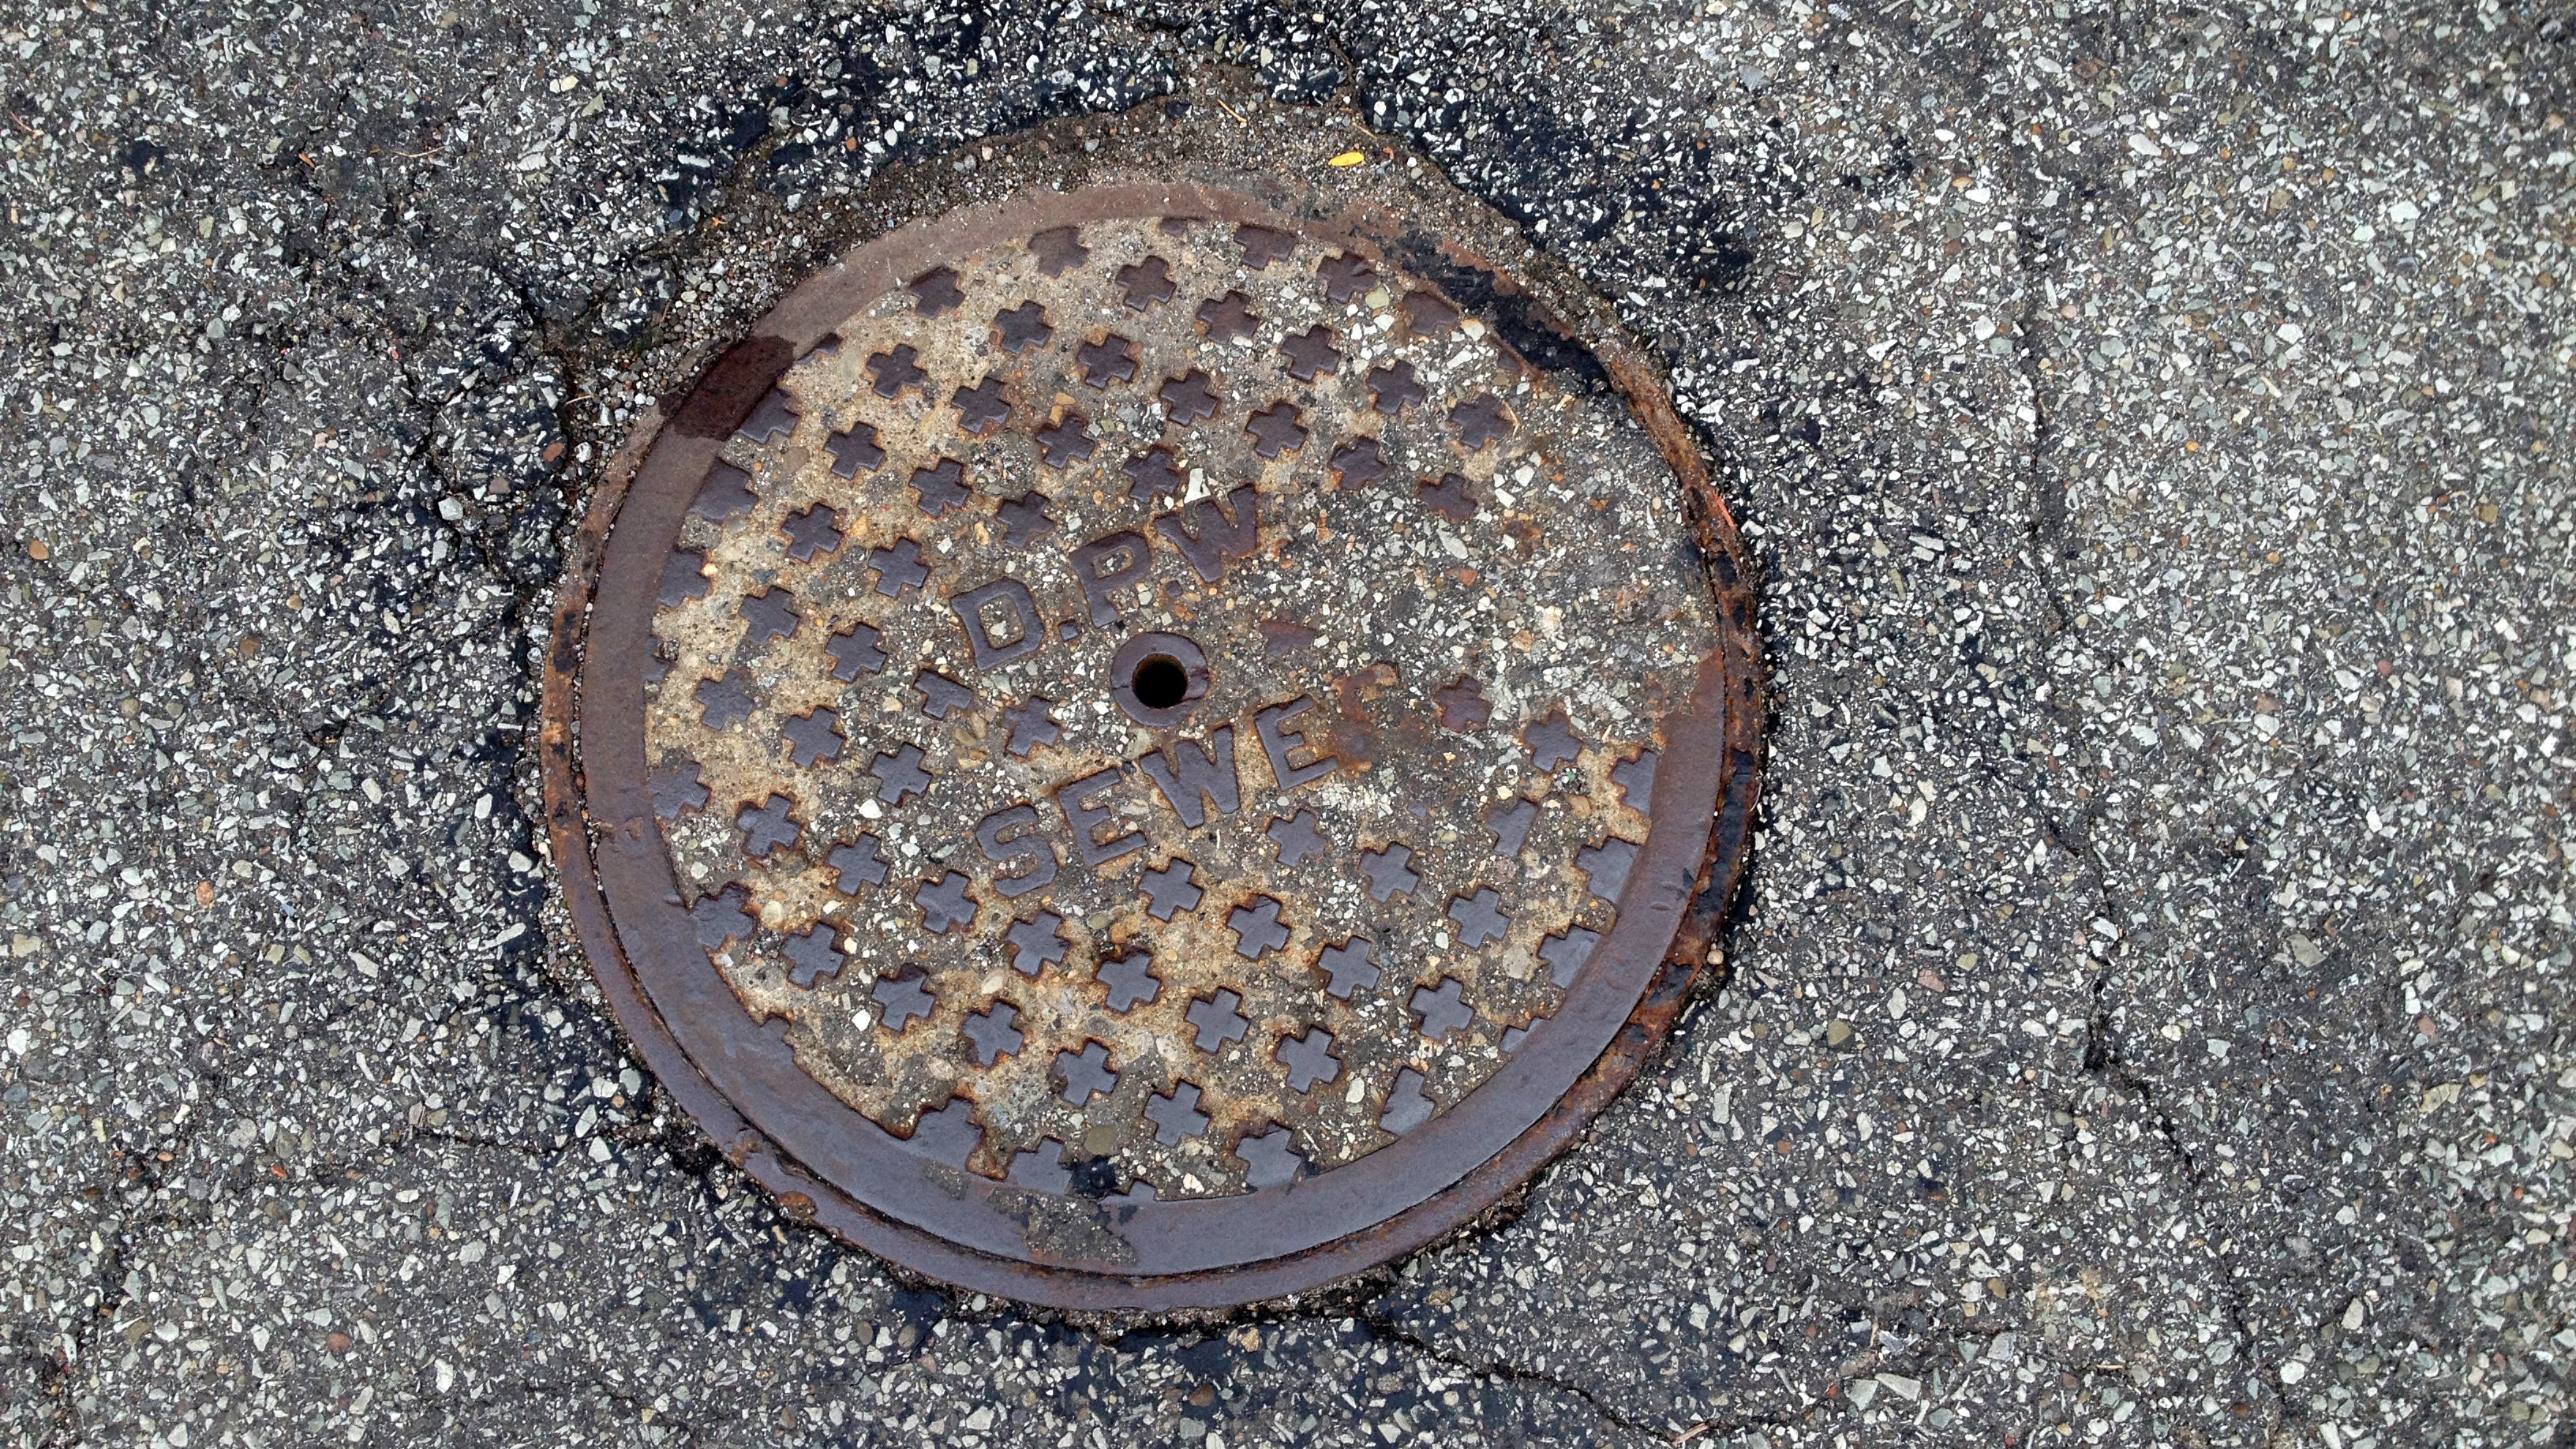 A sewer cover from above.